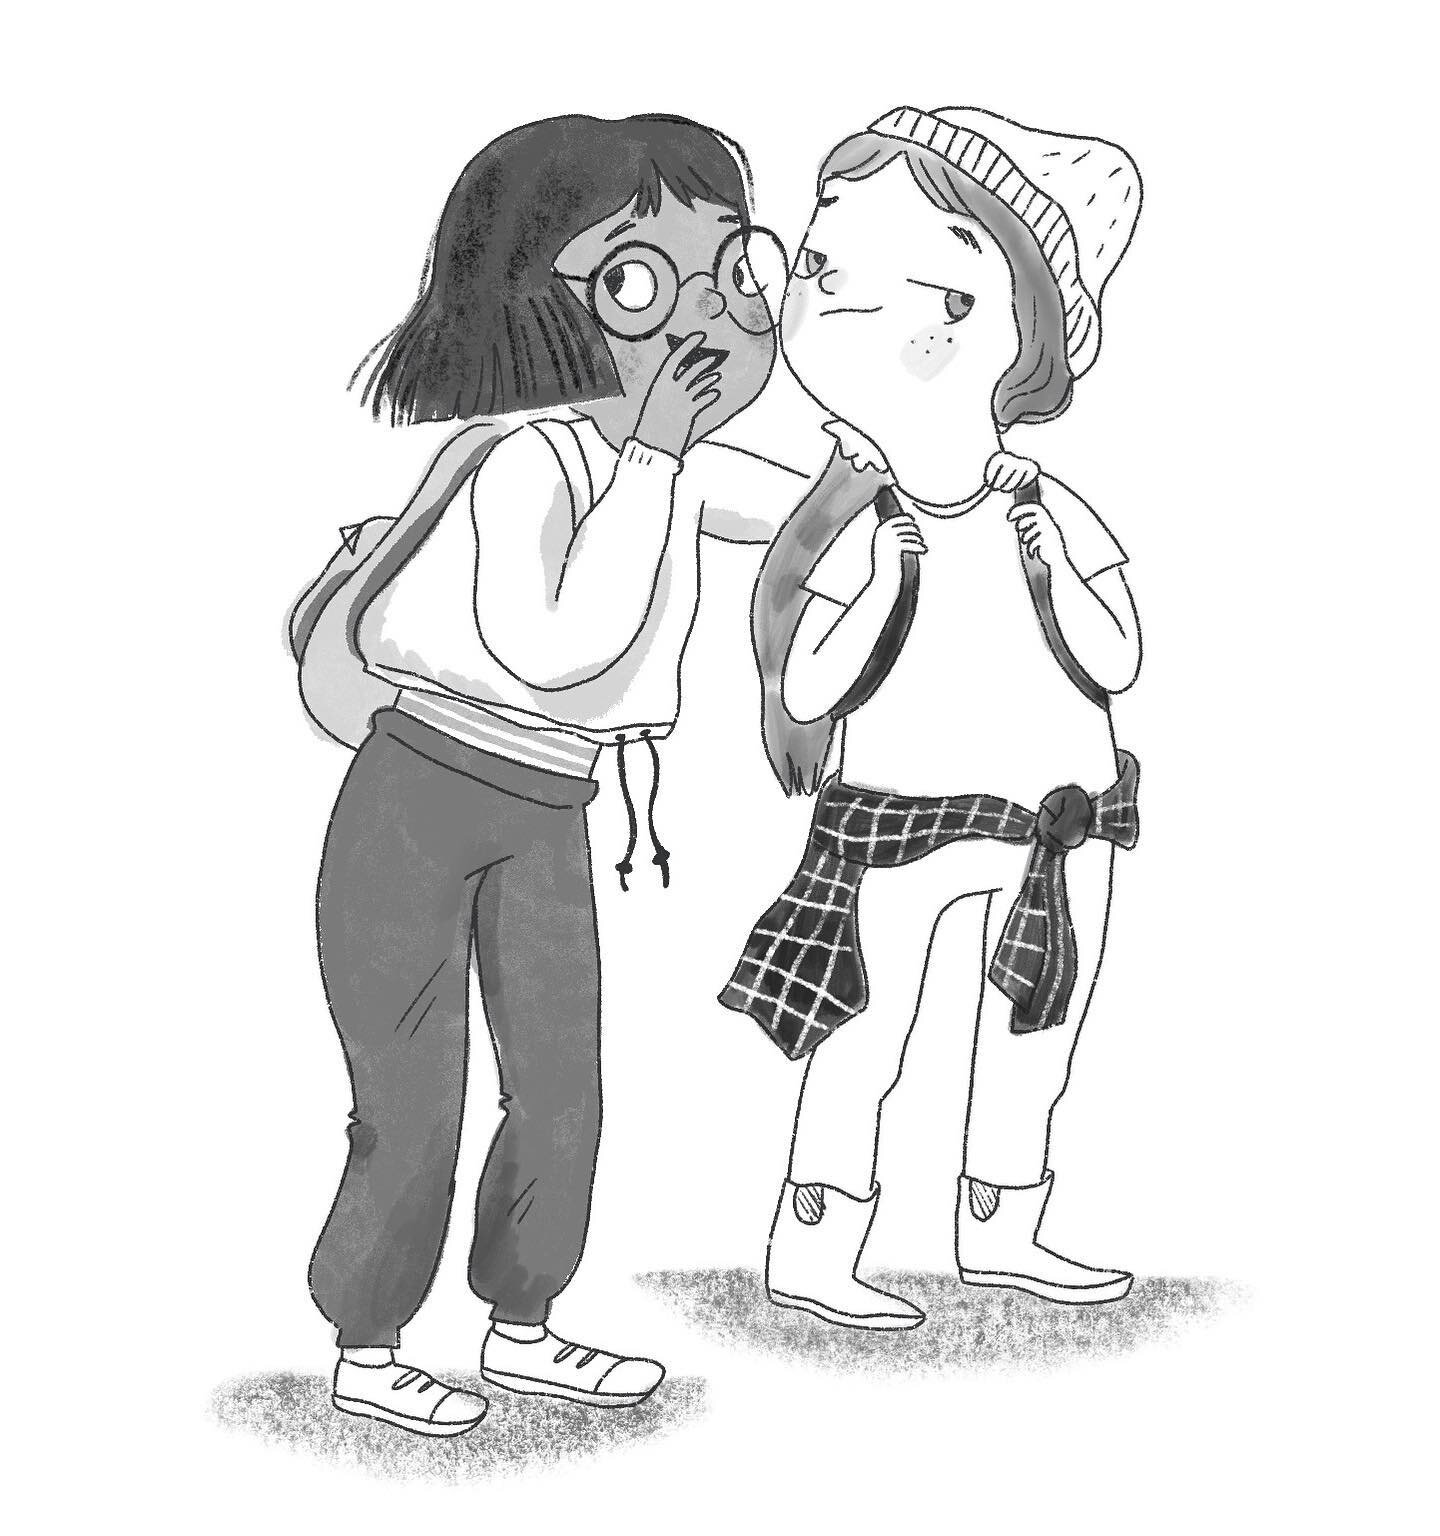 The beginning of some middle grade illustrations&hellip; what could they be whispering about? 
#middlegradebooks #middlegradeillustration #shellylaslo